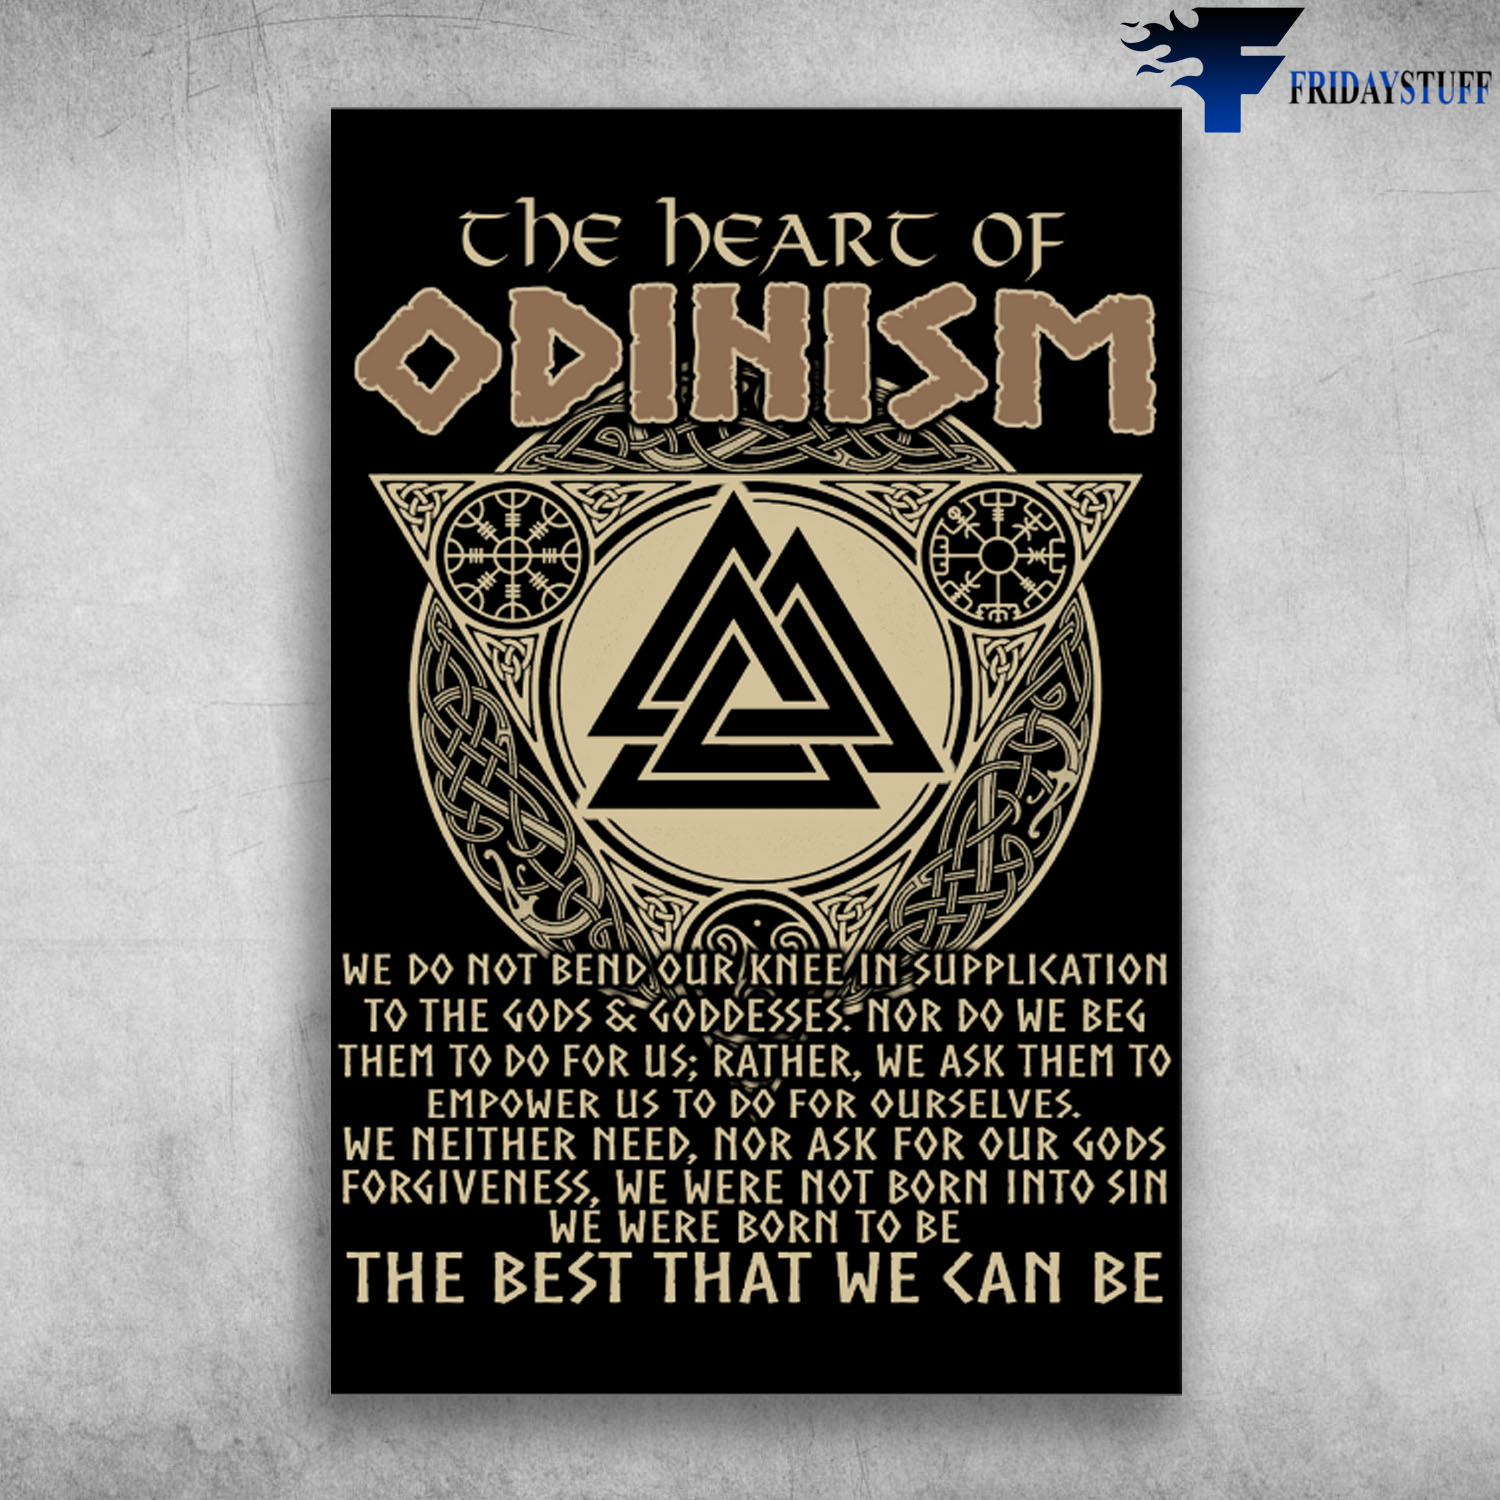 The Heart of Odinism - We Do Not Bend Our Knee In Supplication To The Gods & Goddesses